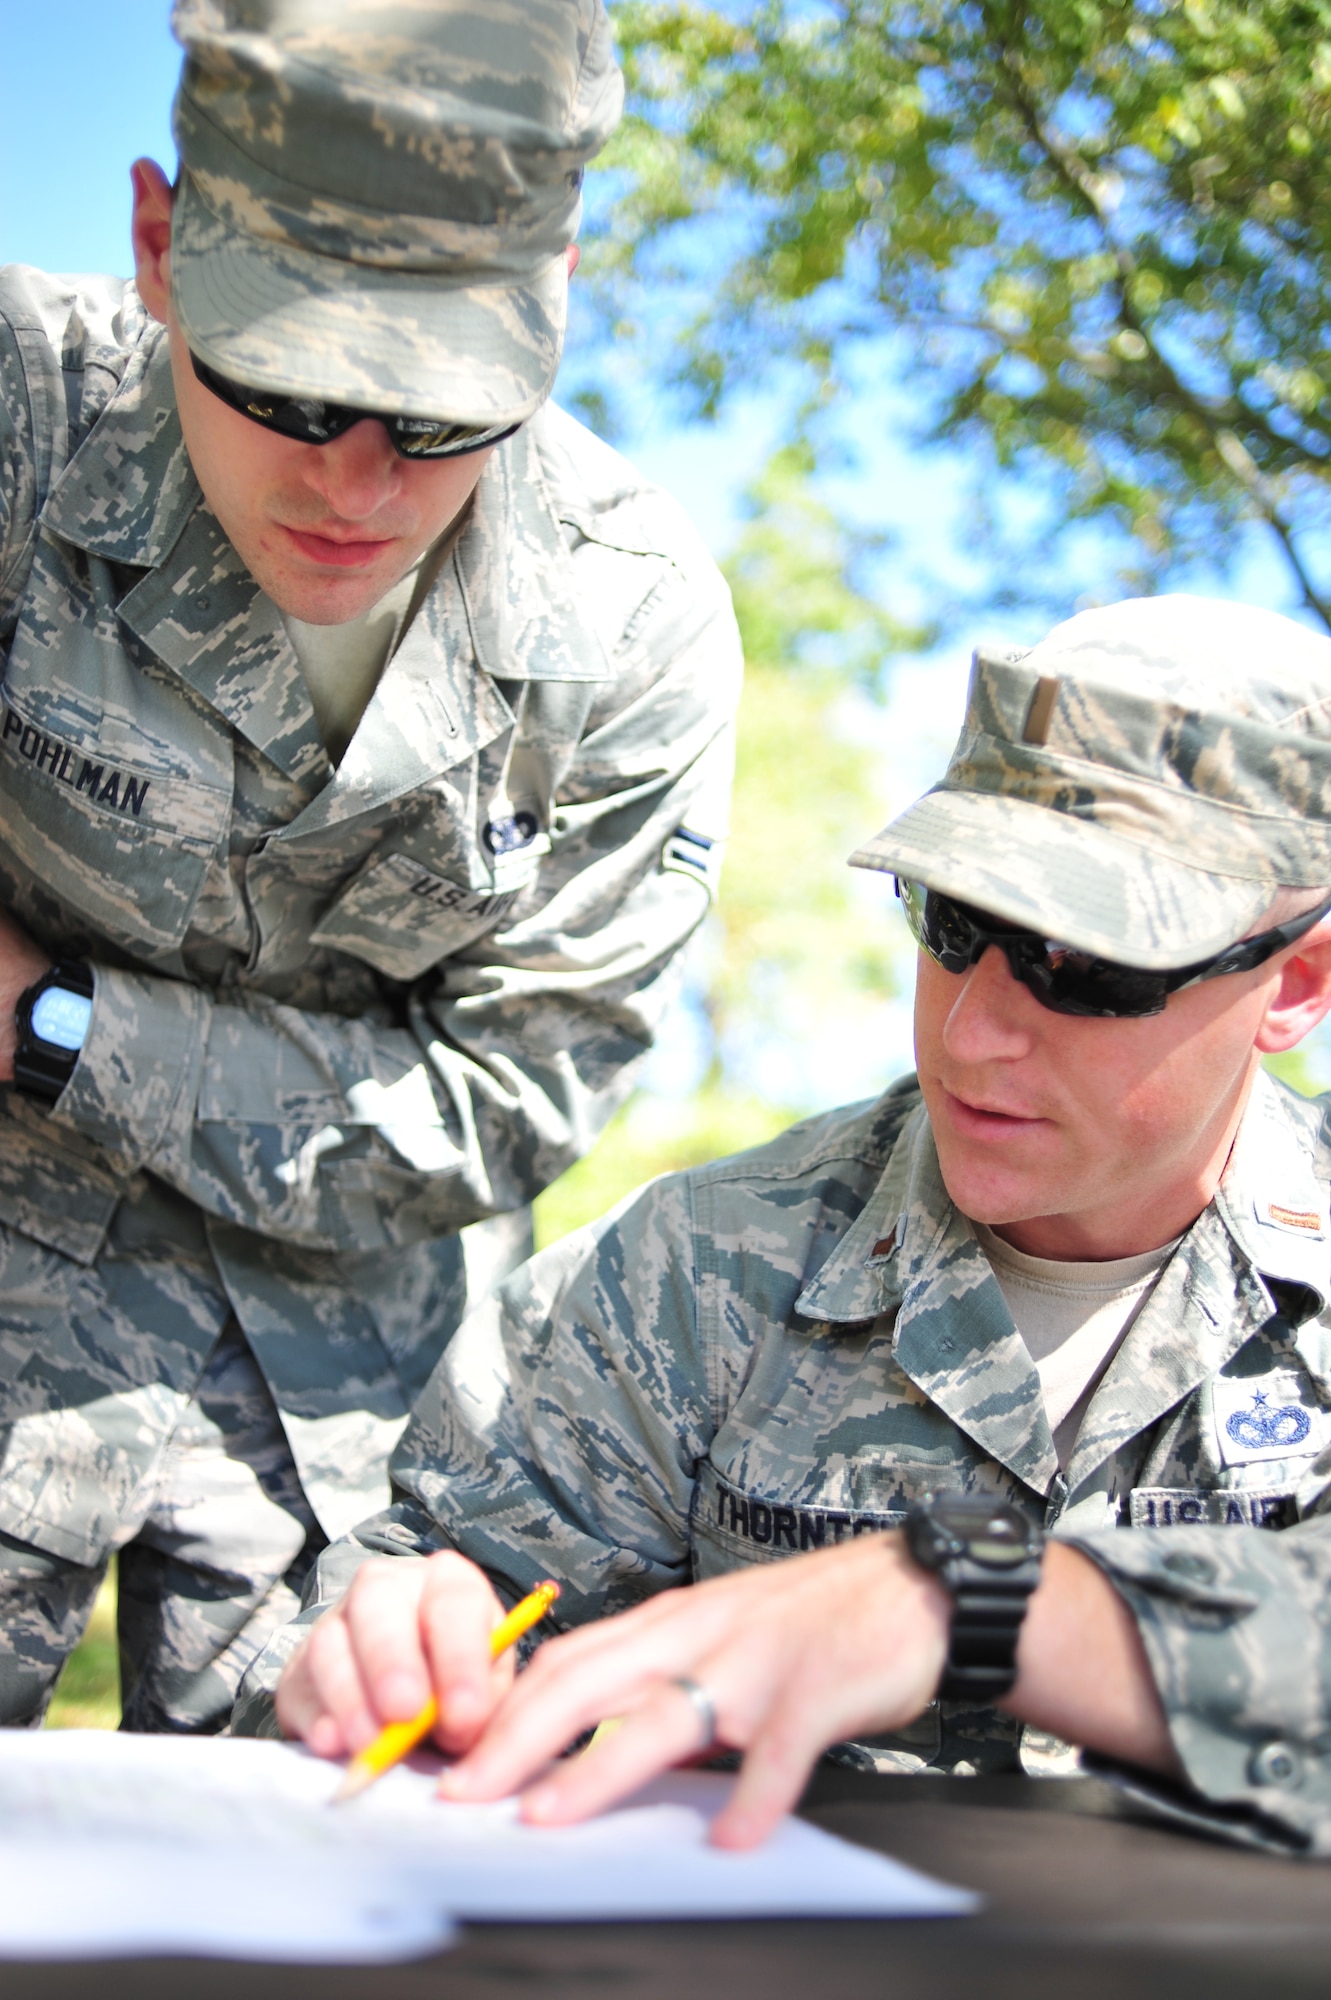 Ohio Air National Guard 2nd Lt. Sam Thornton, security forces operations officer with the 180th Fighter Wing, reviews the instructions and map for a land navigation course with a fellow Airman at Oak Openings Metro Park in Swanton, Ohio, on Sep. 27, 2015. The 180th Security Forces Squadron performed their annual training requirement by plotting location points on maps and using compasses to find their way through the park. (Ohio Air National Guard photo by Staff Sgt. John Wilkes)